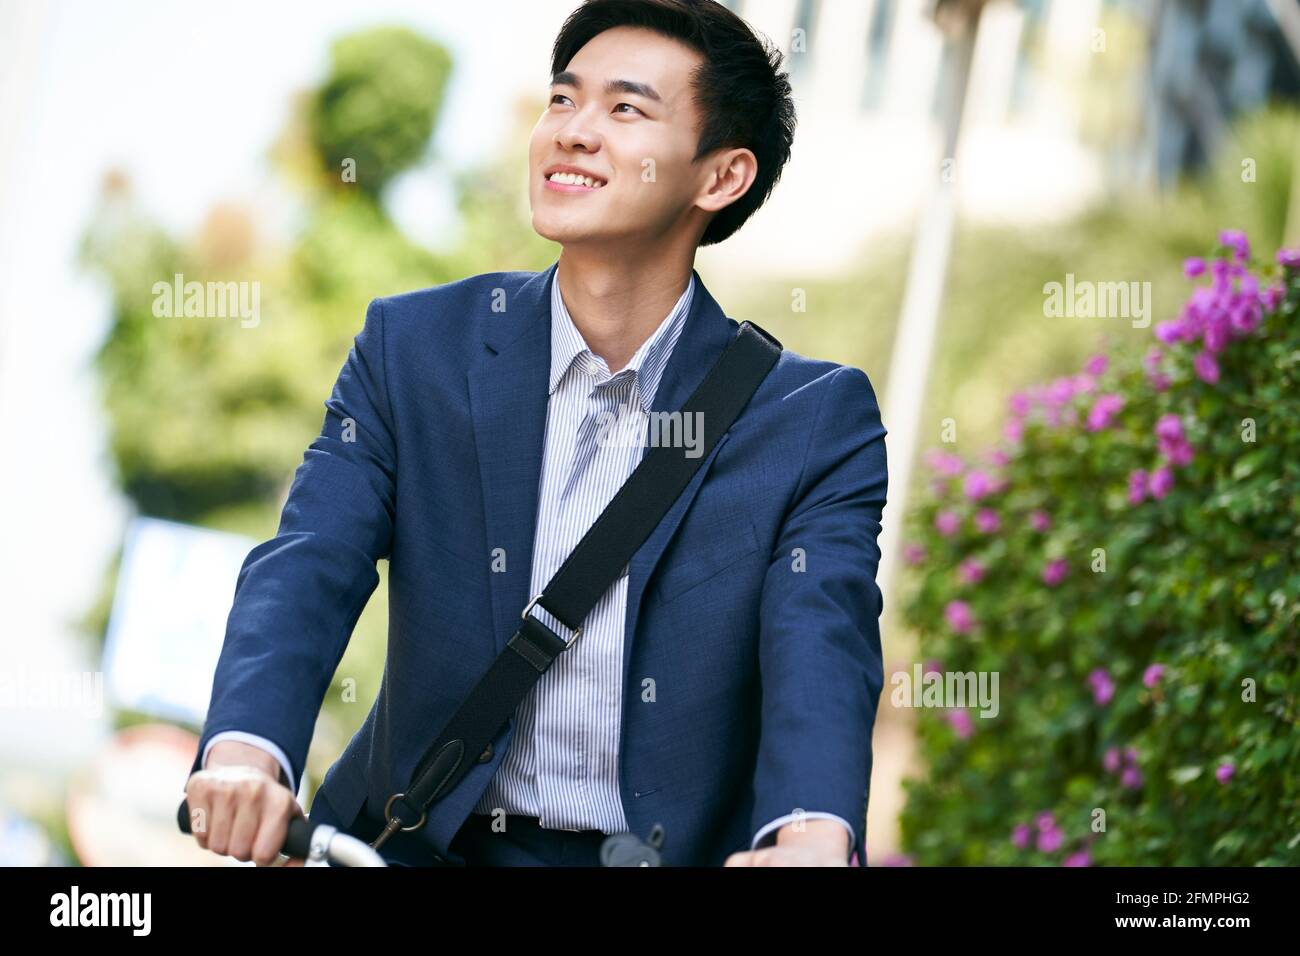 young asian business man riding bicycle to or from work, happy and smiling Stock Photo